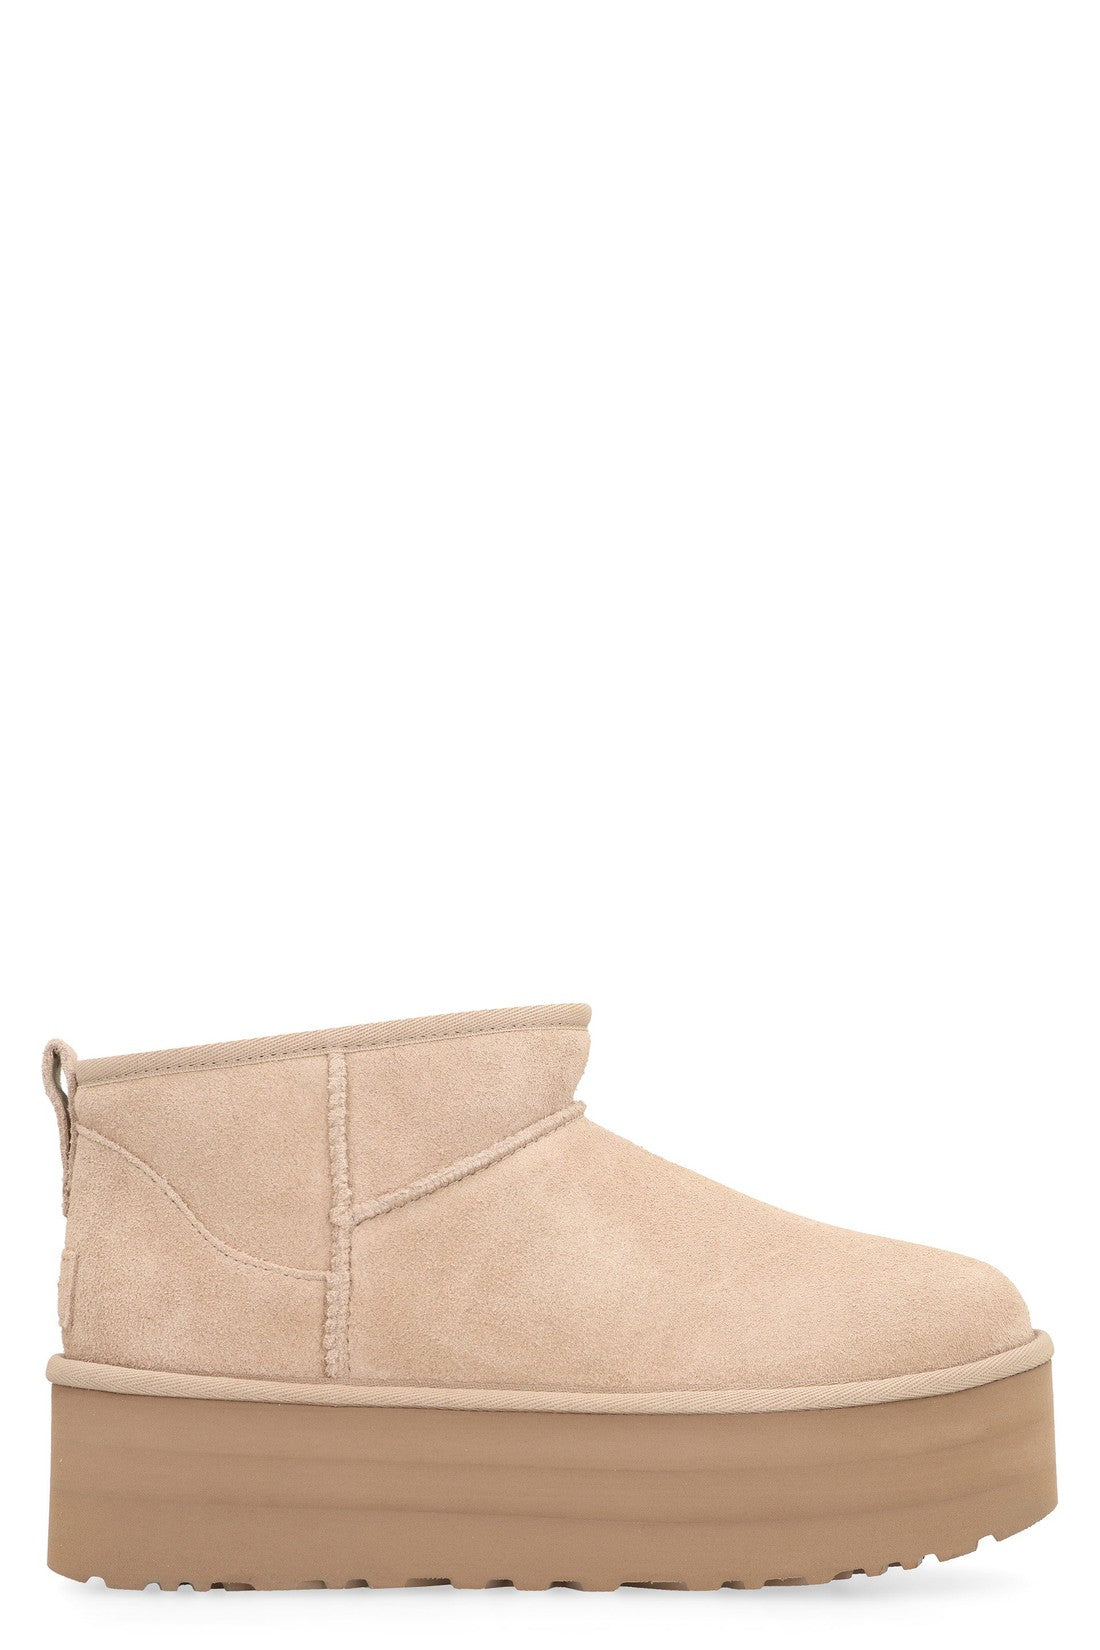 UGG-OUTLET-SALE-Classic Ultra Mini Boots-ARCHIVIST